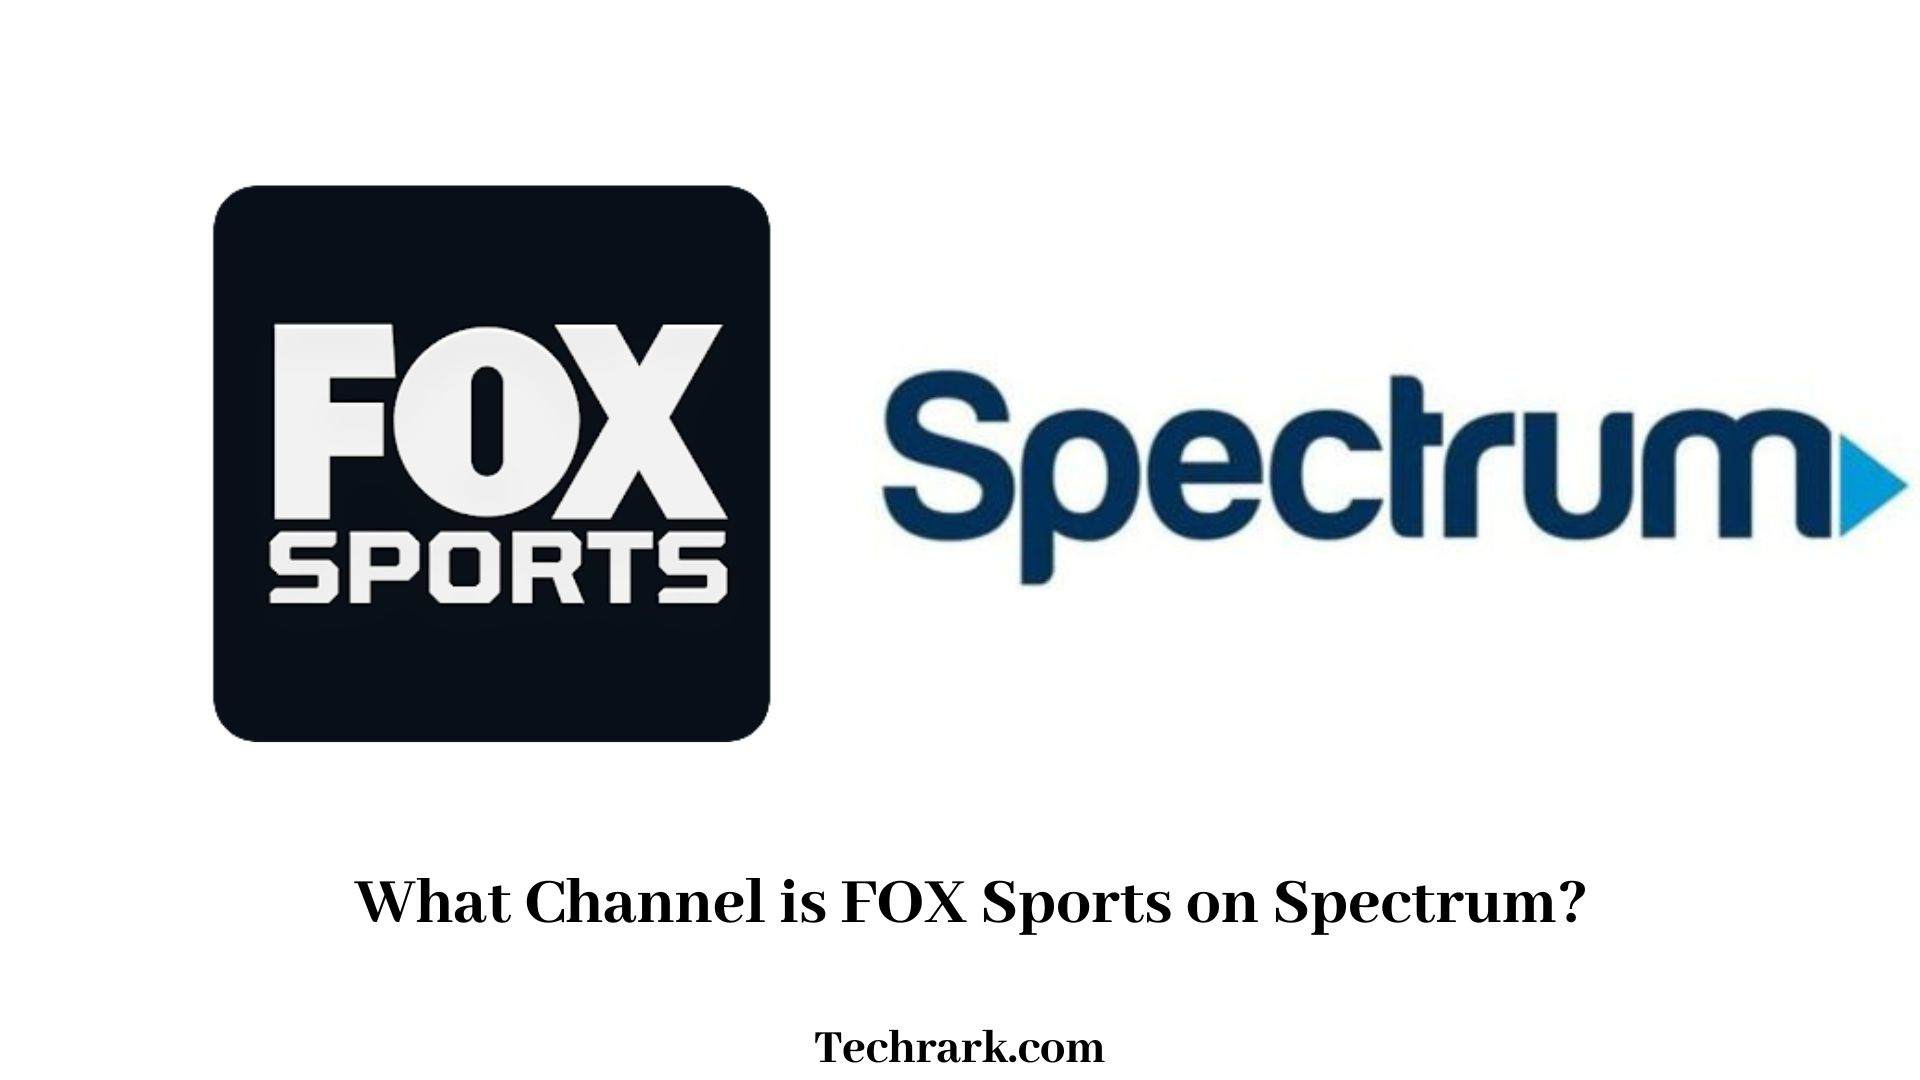 What Channel is FOX Sports on Spectrum